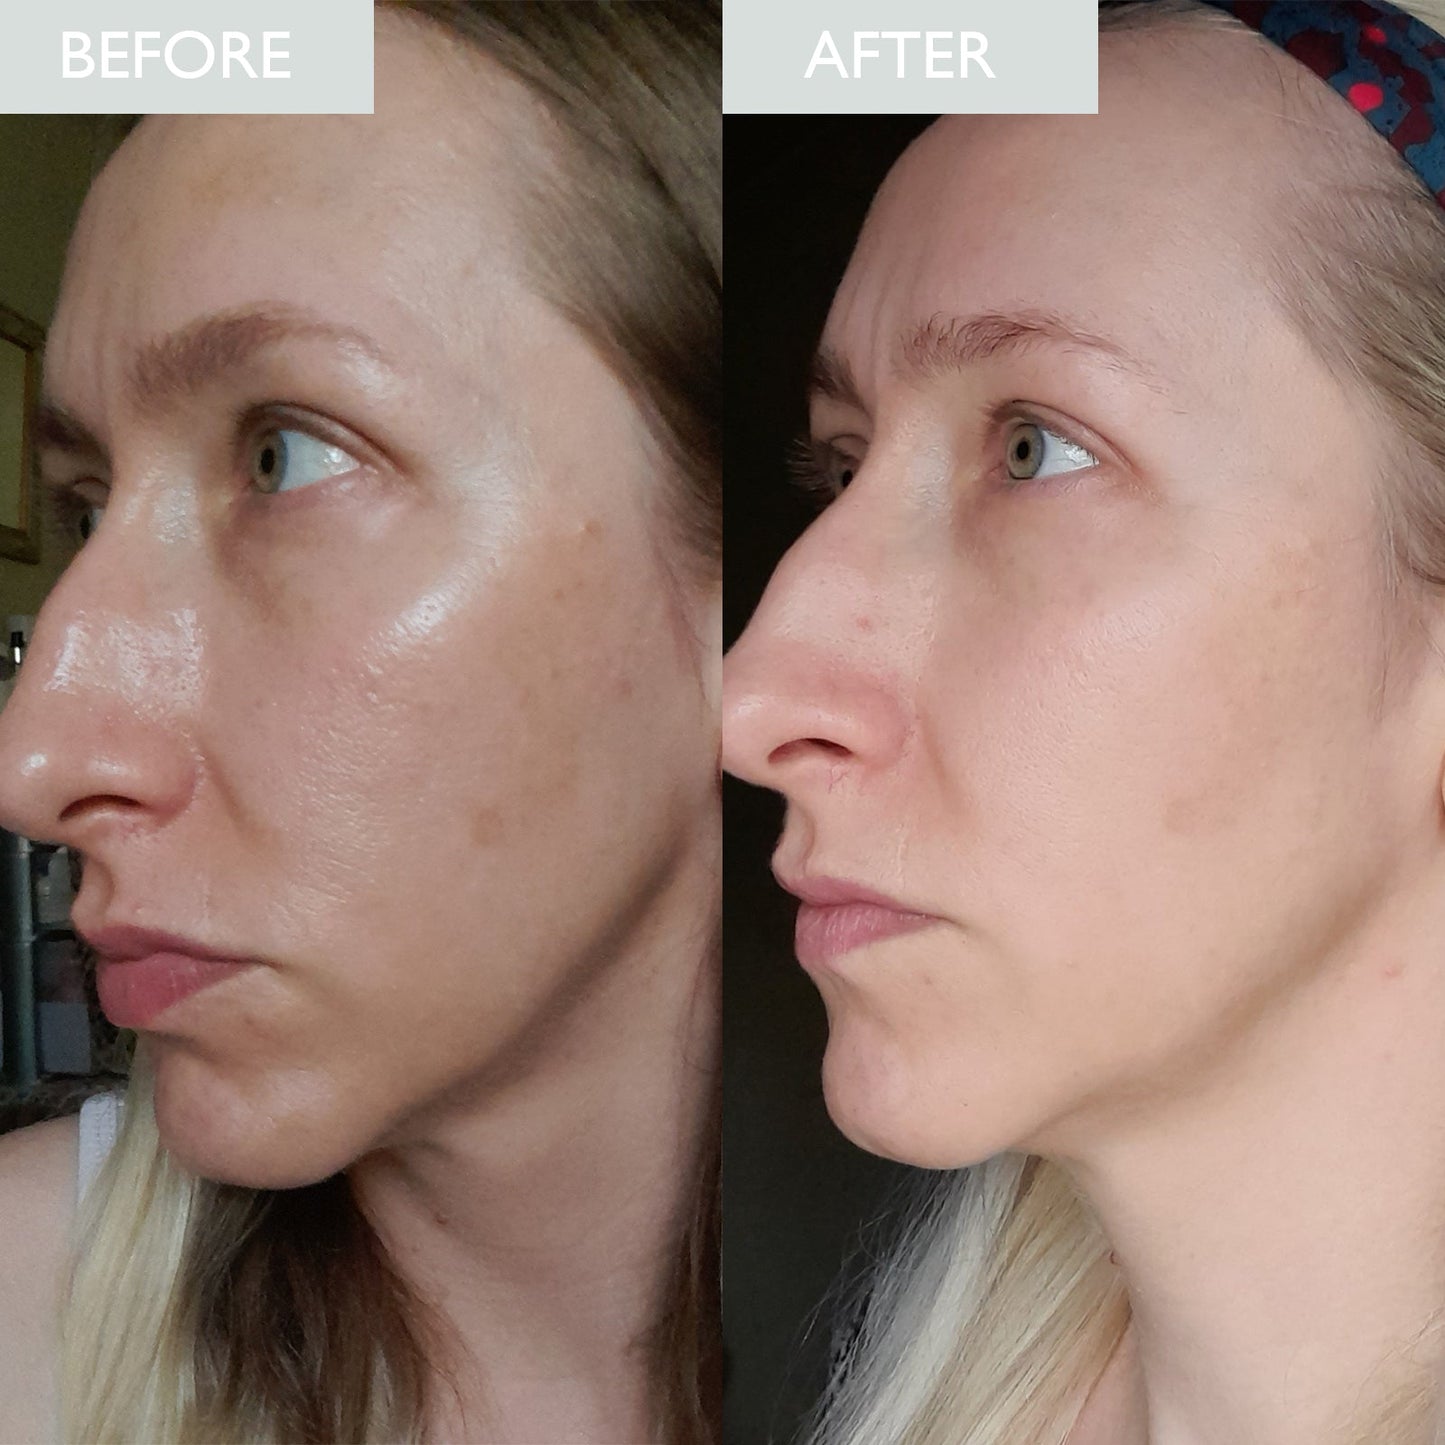 Before and after image of oily skin improvement after using green clay purifying mask